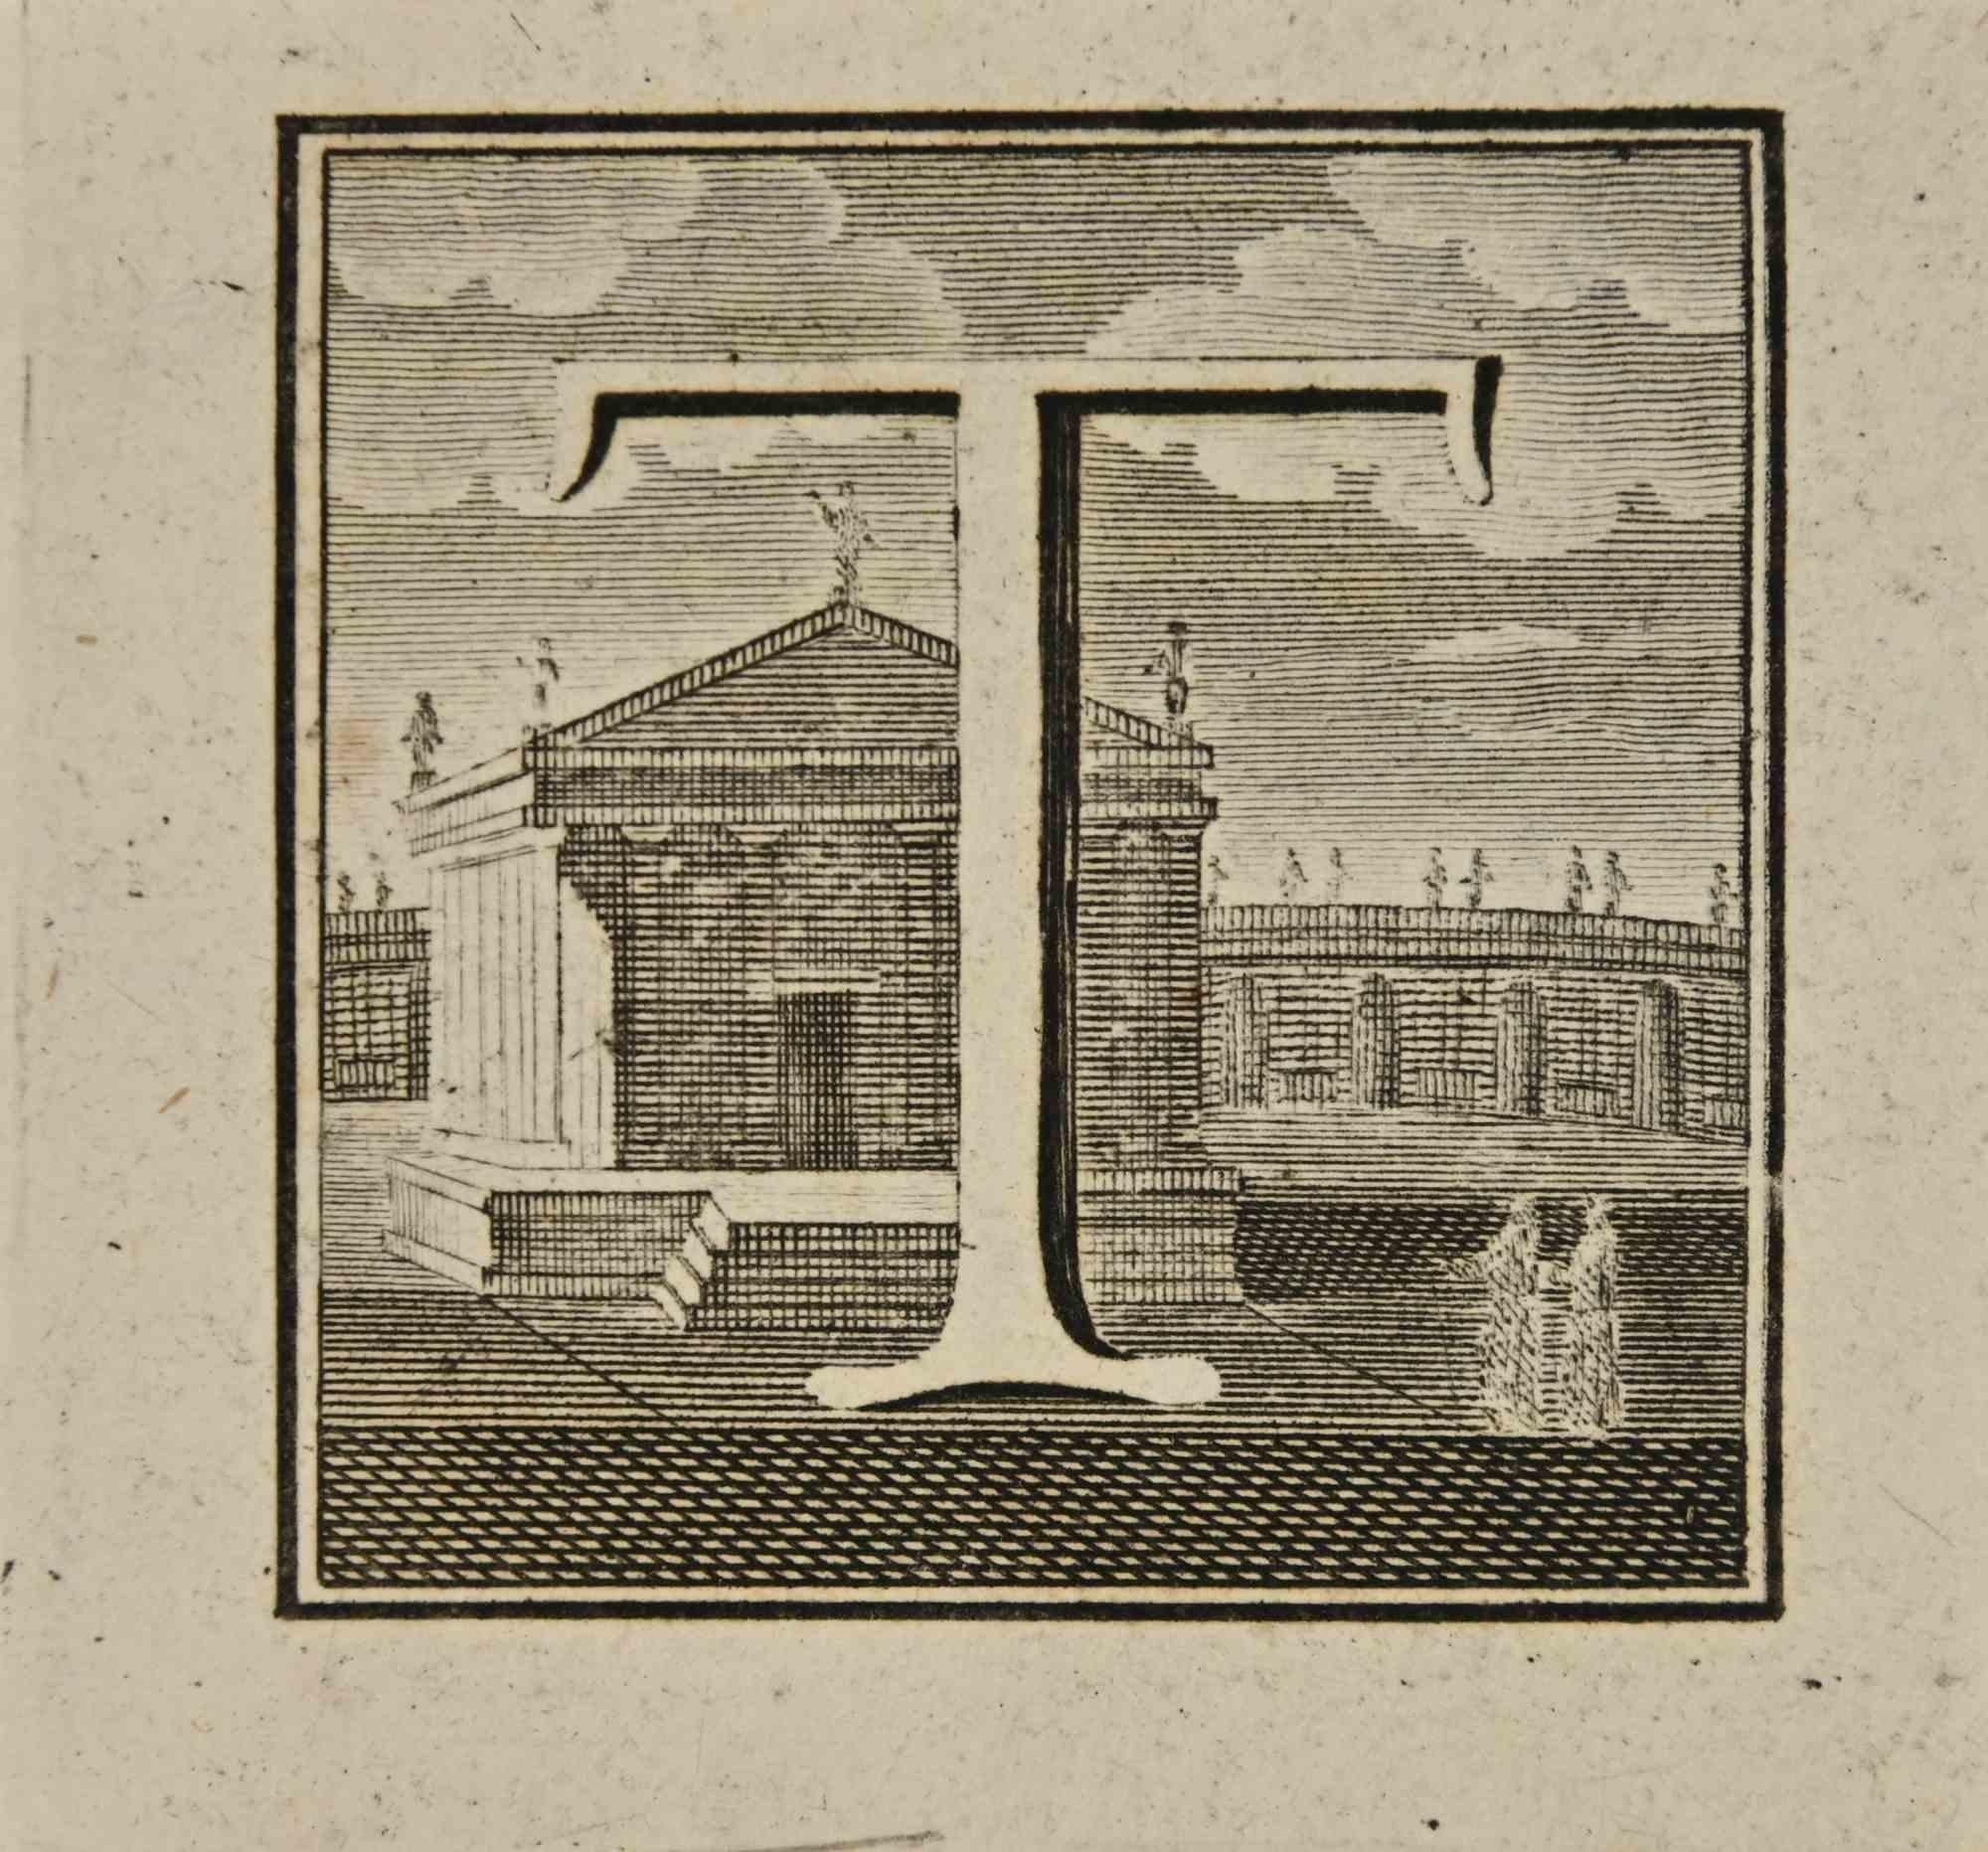 Letter of the Alphabet T,  from the series "Antiquities of Herculaneum", is an etching on paper realized by Luigi Vanvitelli in the 18th century.

Good conditions.

The etching belongs to the print suite “Antiquities of Herculaneum Exposed”